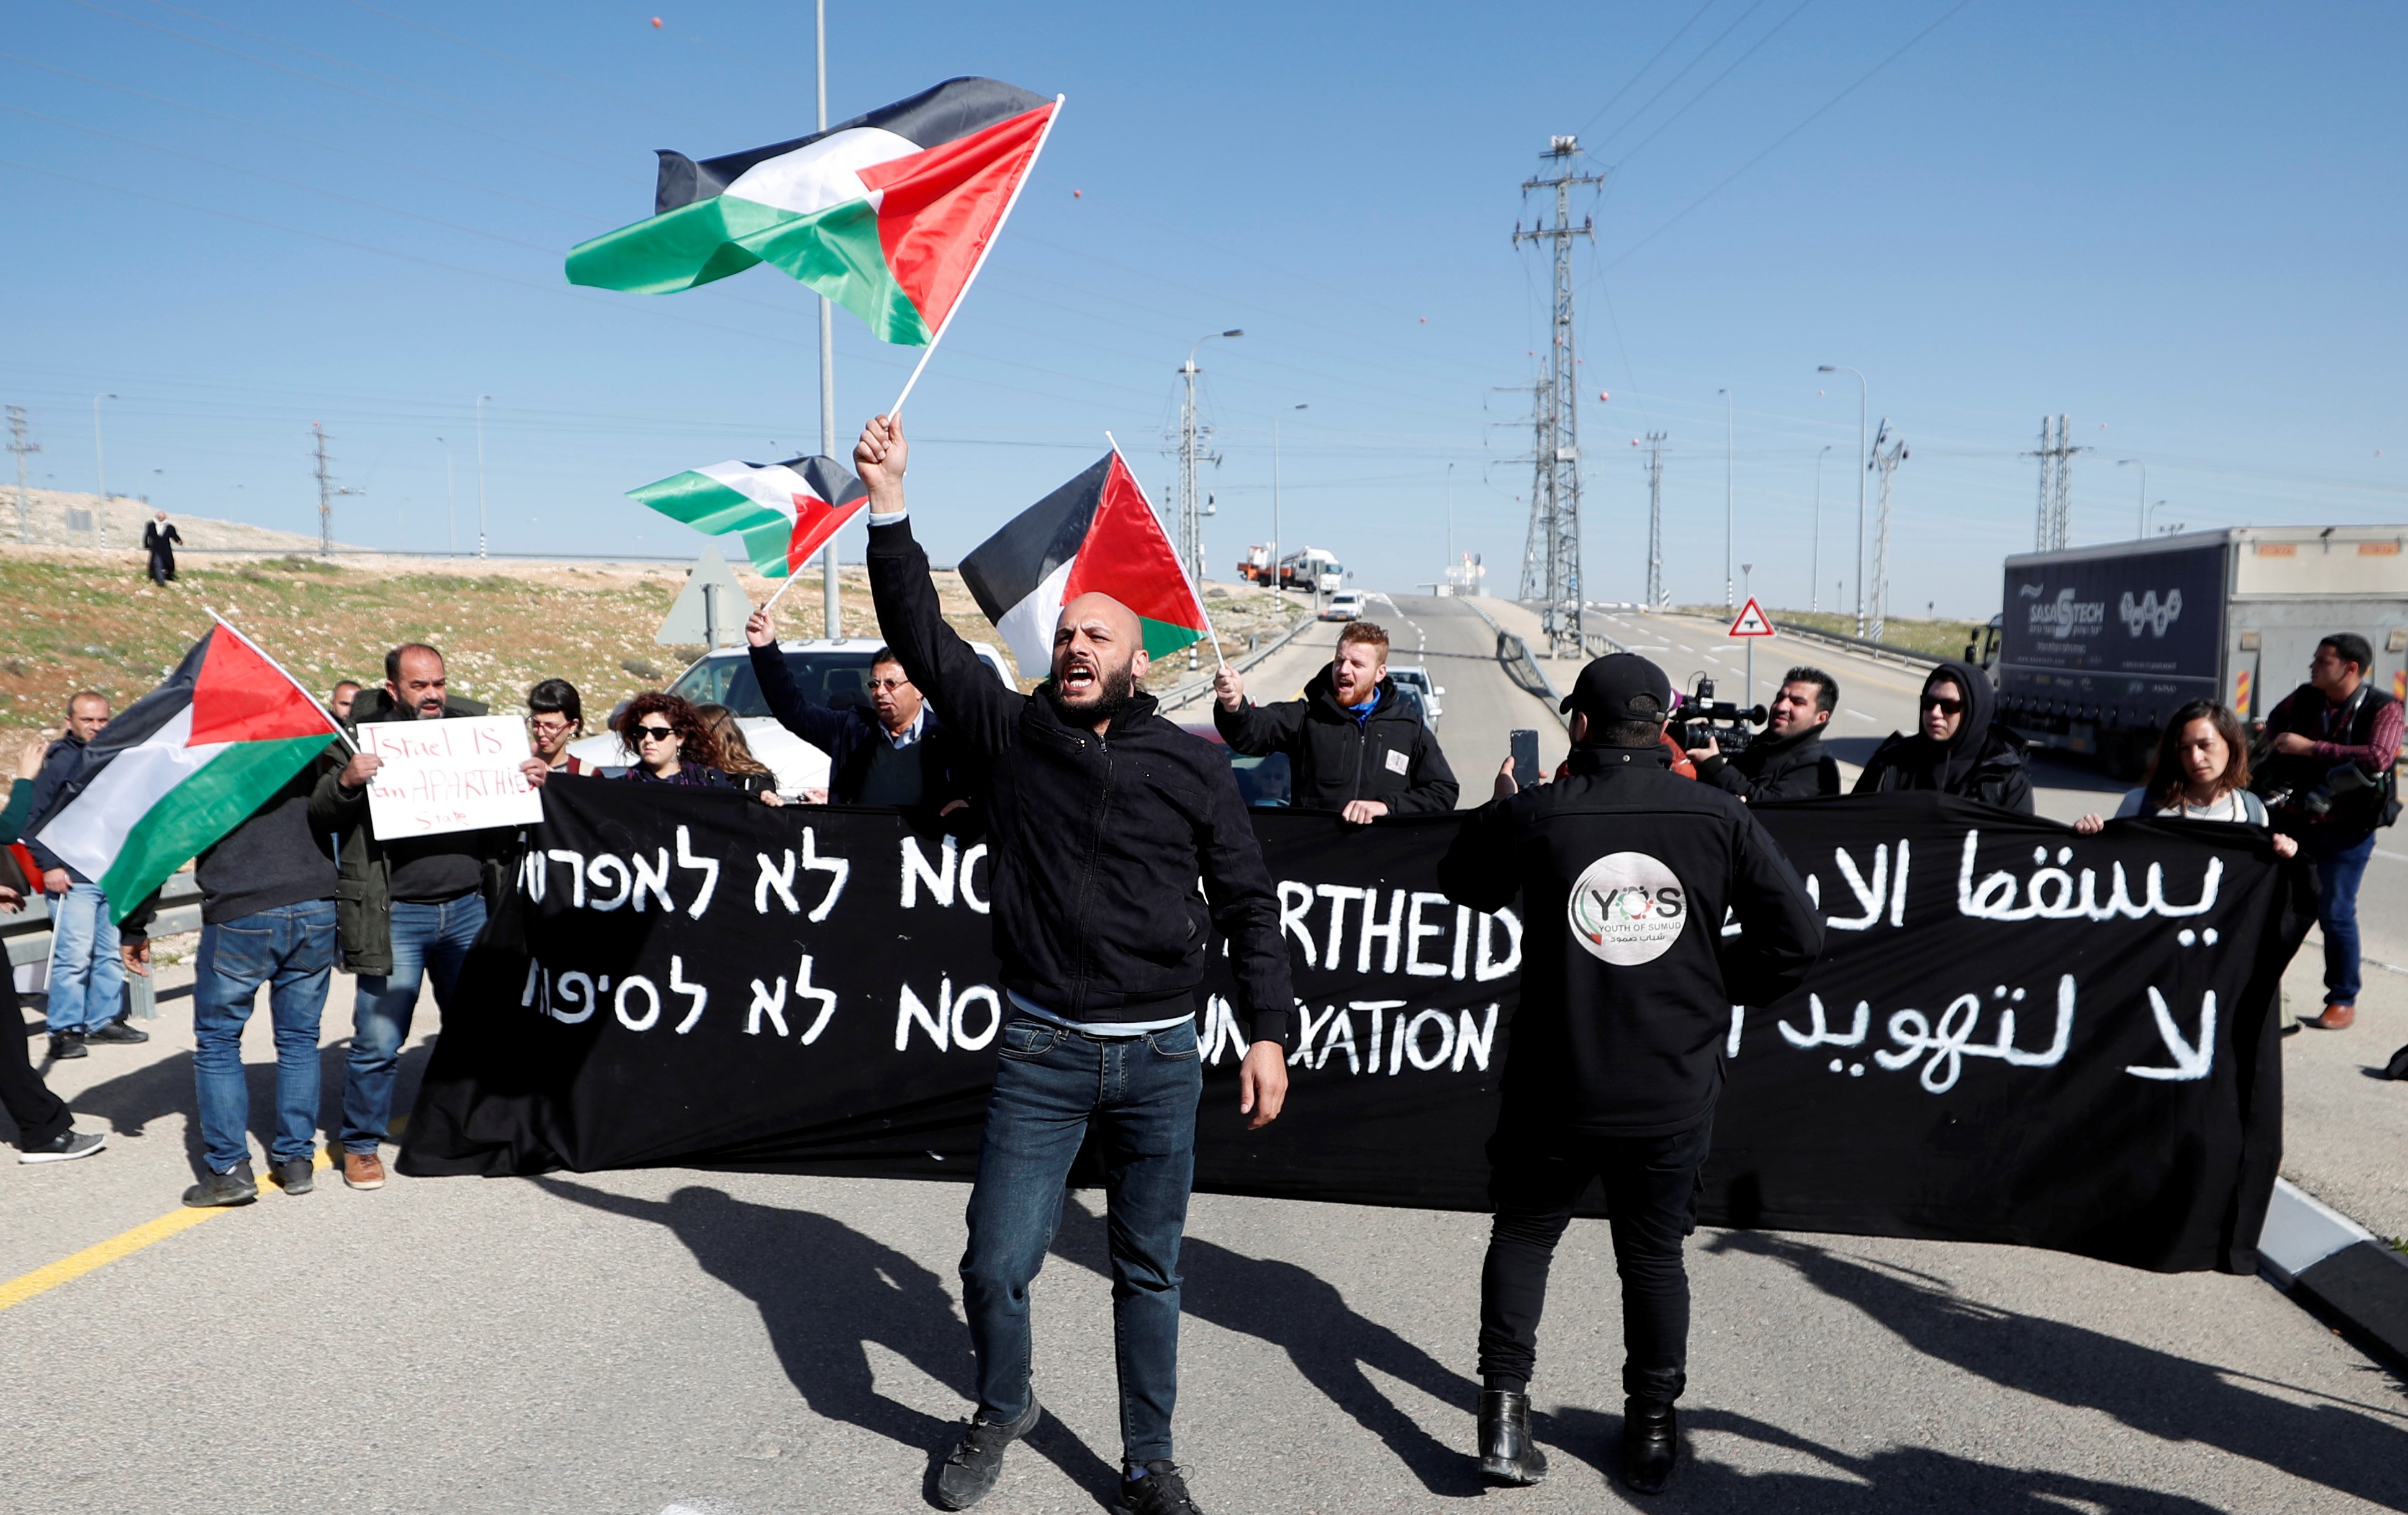 Activists in a protest in the village of Anata, in the Israeli-occupied West Bank, on the outskirts of Jerusalem 23 January (Reuters)